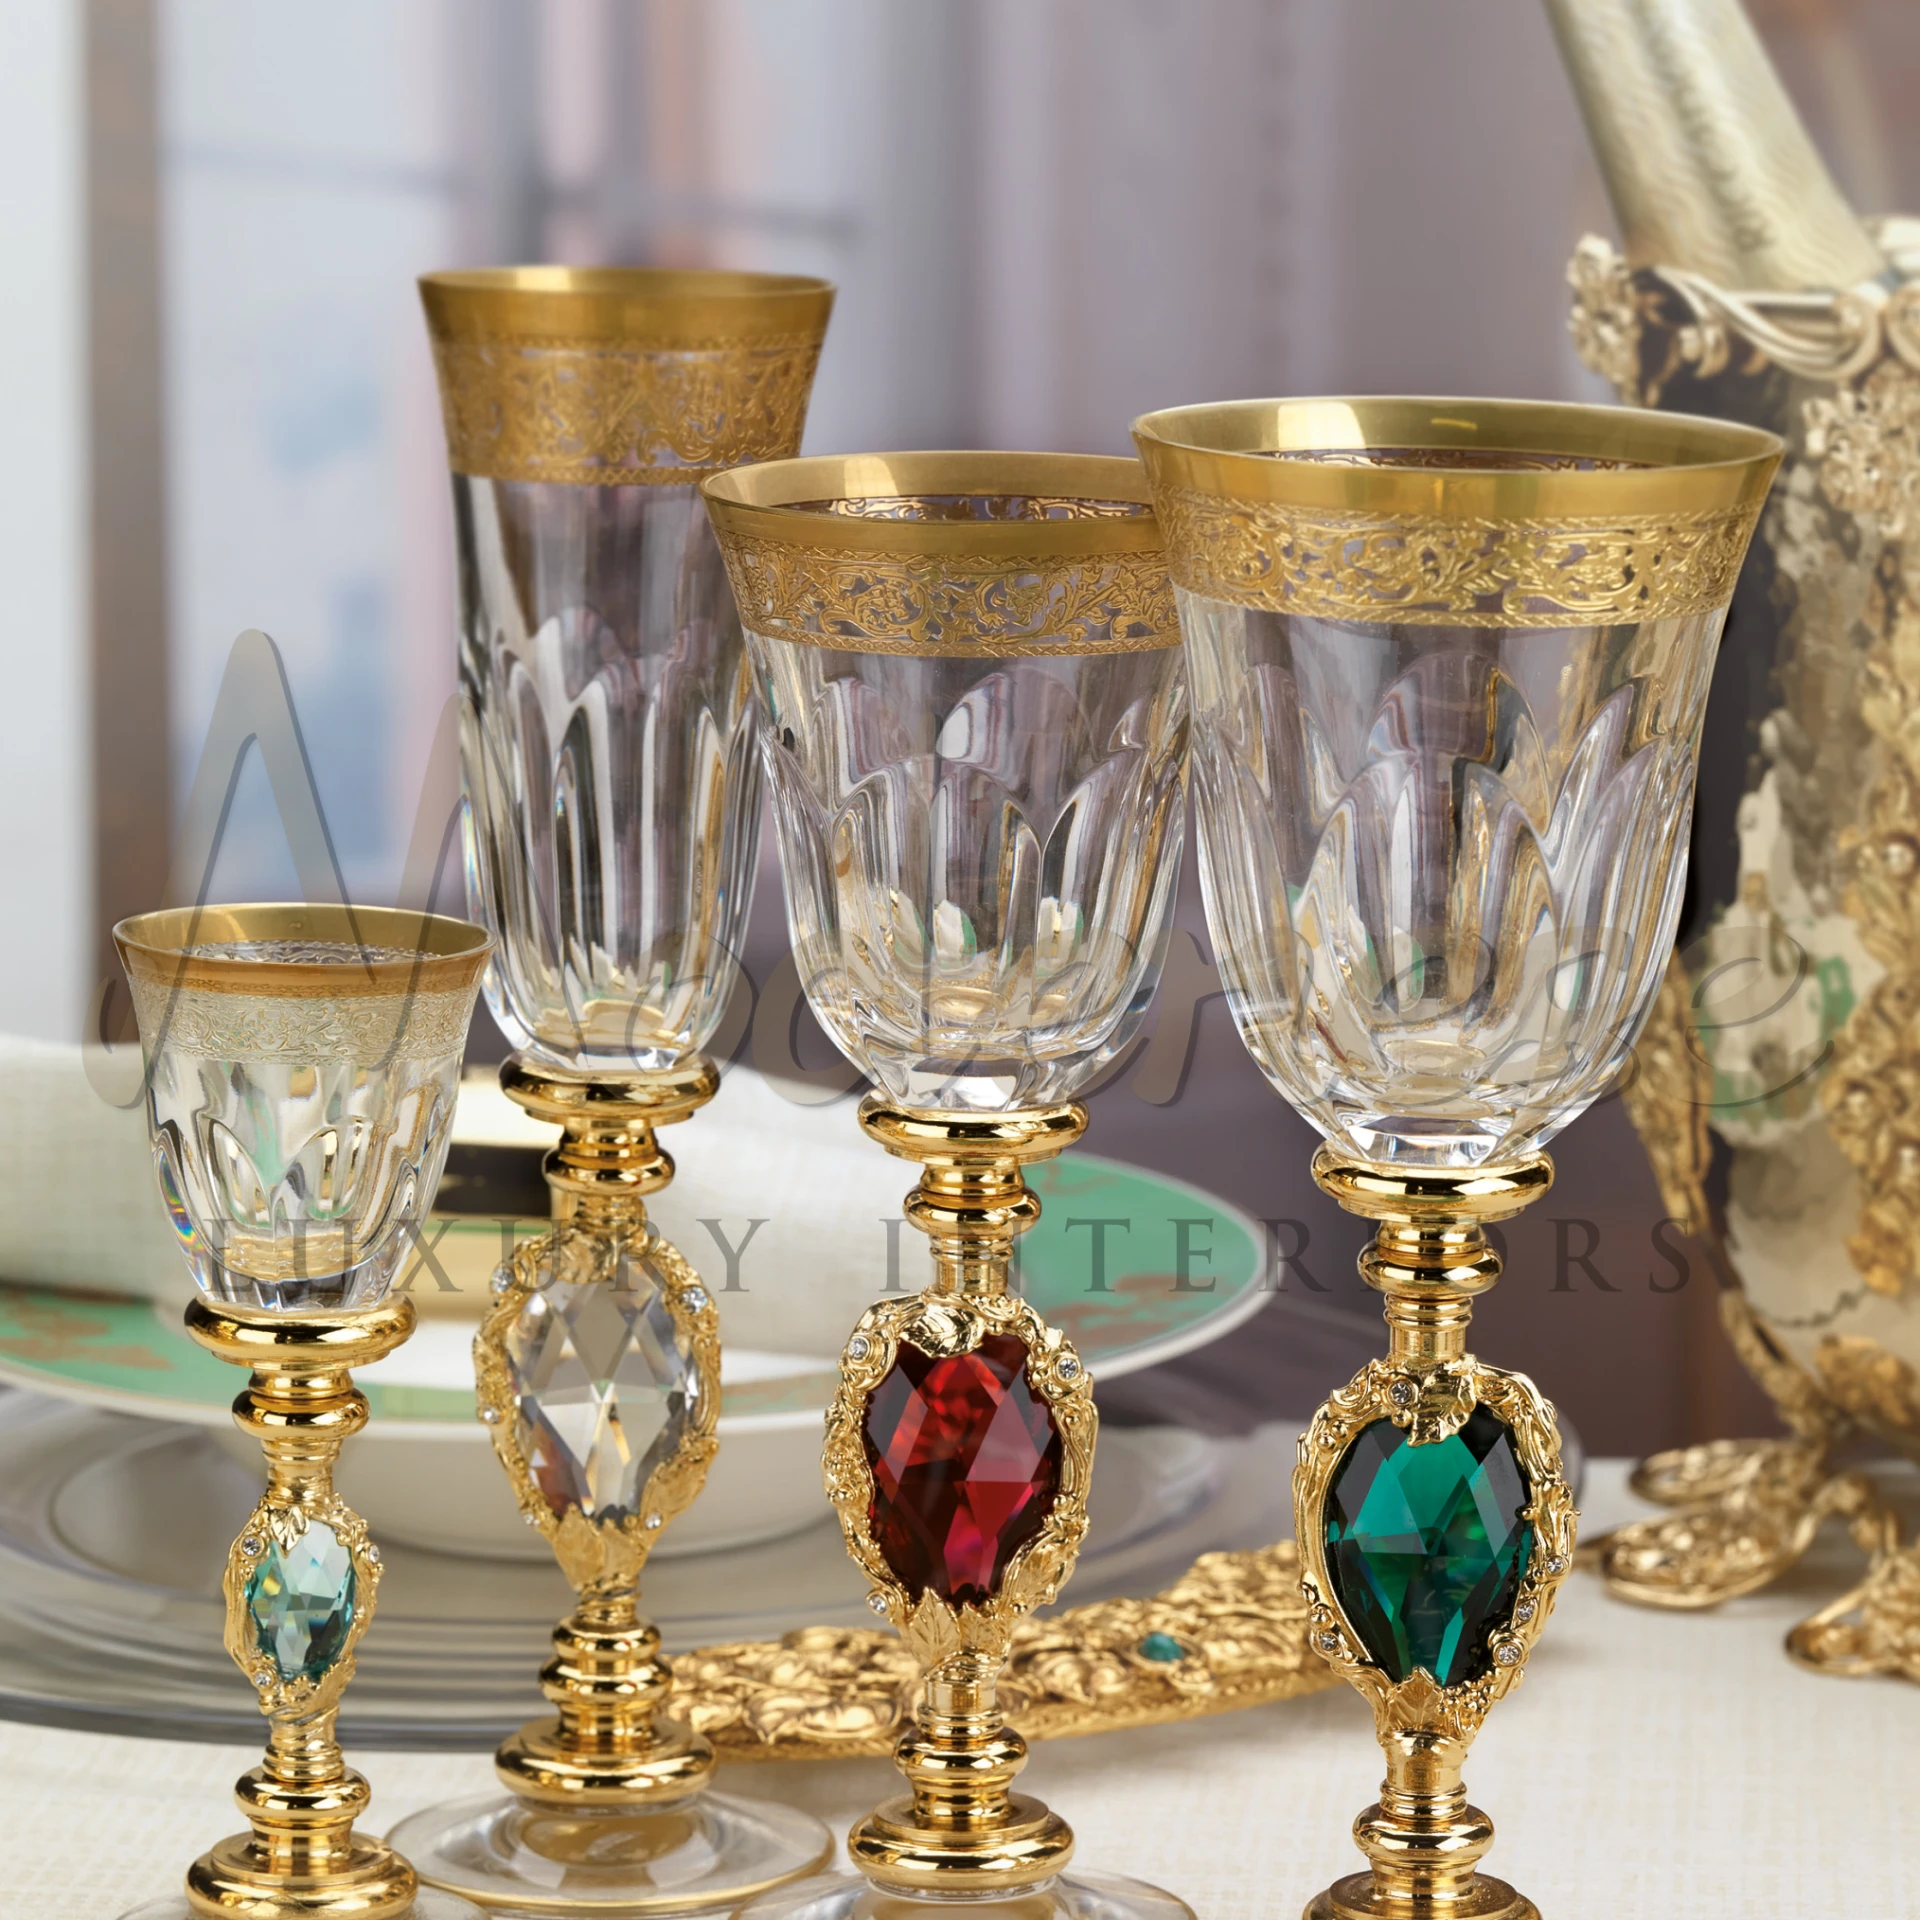 Luxurious crystal glasses with intricate gold designs and colorful gems on stem